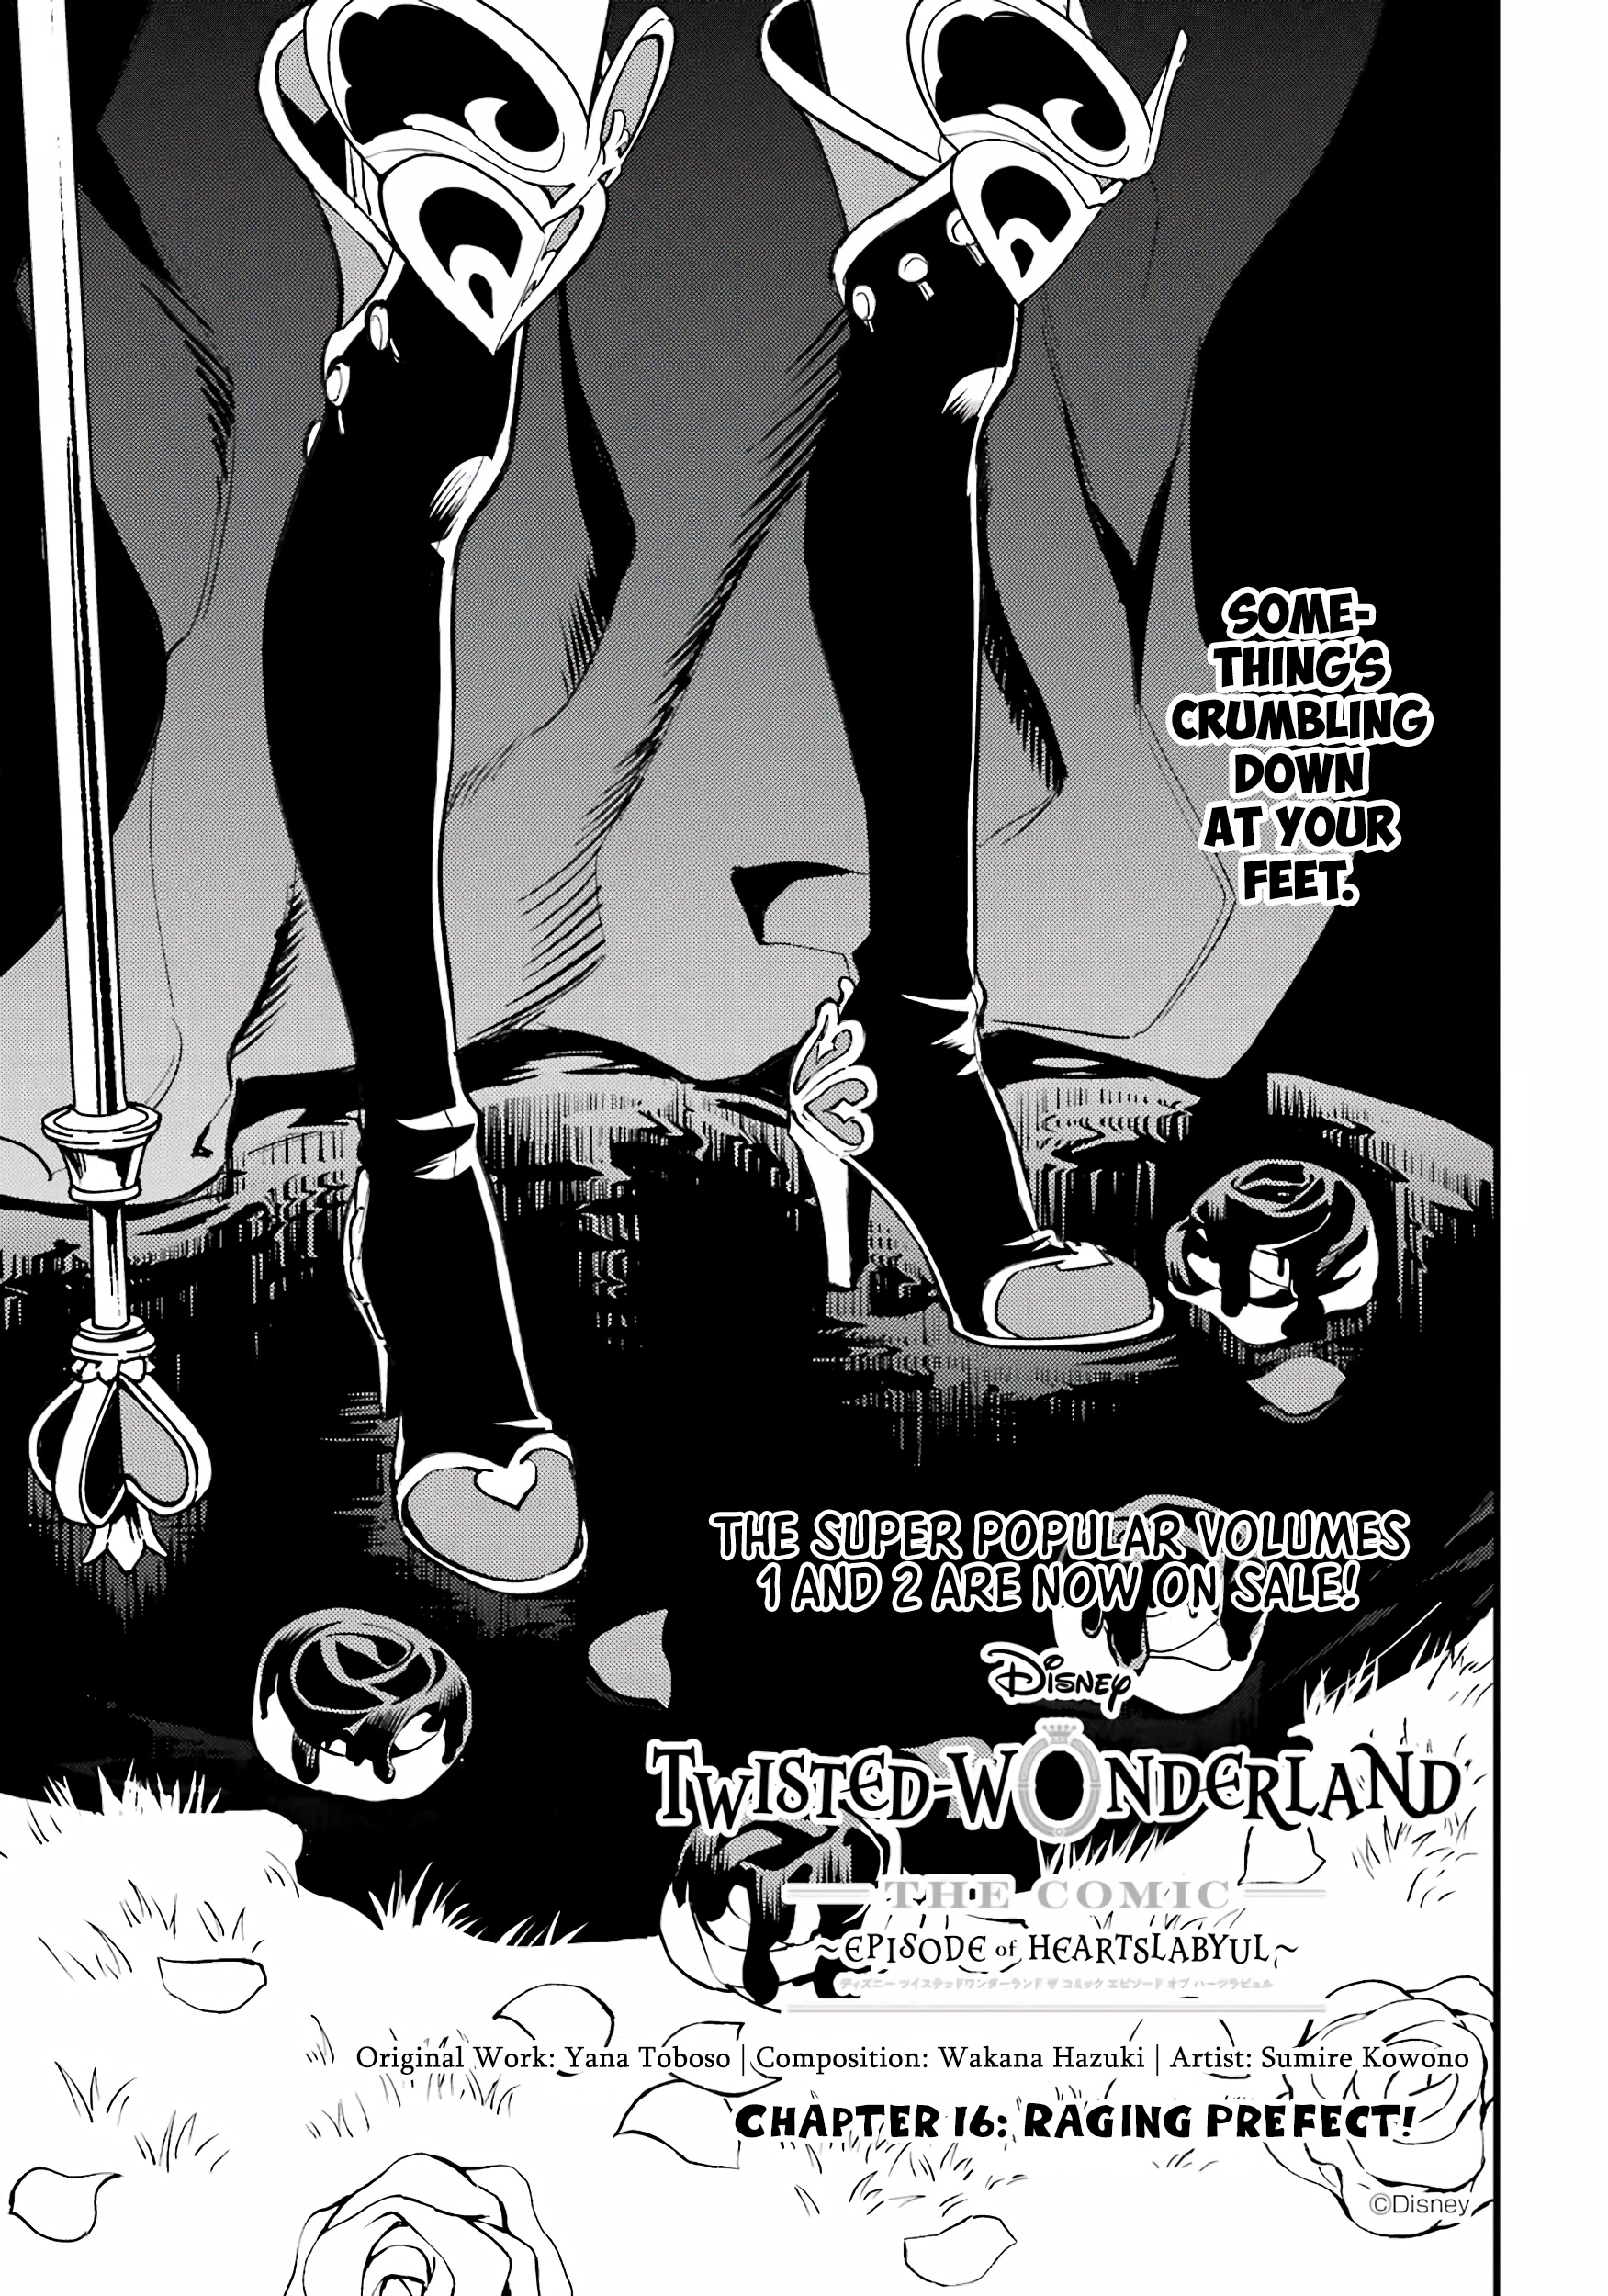 Disney Twisted Wonderland - The Comic - ~Episode Of Heartslabyul~ Vol.3 Chapter 16: Raging Prefect! - Picture 1